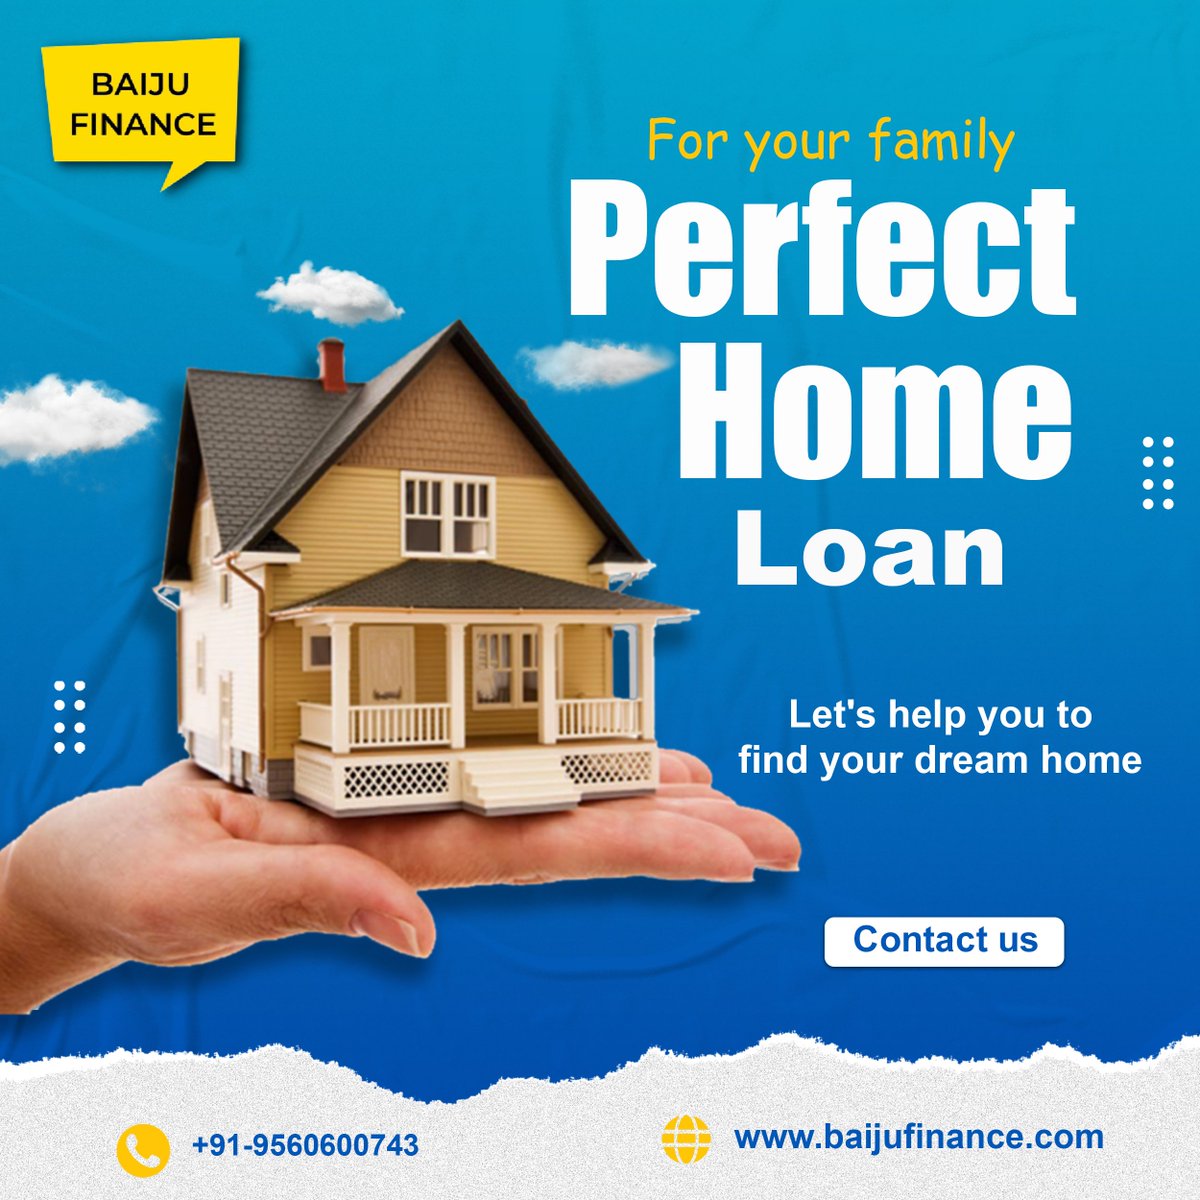 For your family perfect home loan ..
Let's help you to find your dream home
.
.
For more details Contact Now: +91-9560600743
.
.
.
#baijufinance #HomeLoan #Home #Yourdreamhome #HousingFinance #Loans #Homeloan #Quicksanctions #Documentation #Homeloantips #Homeloansmadesimple